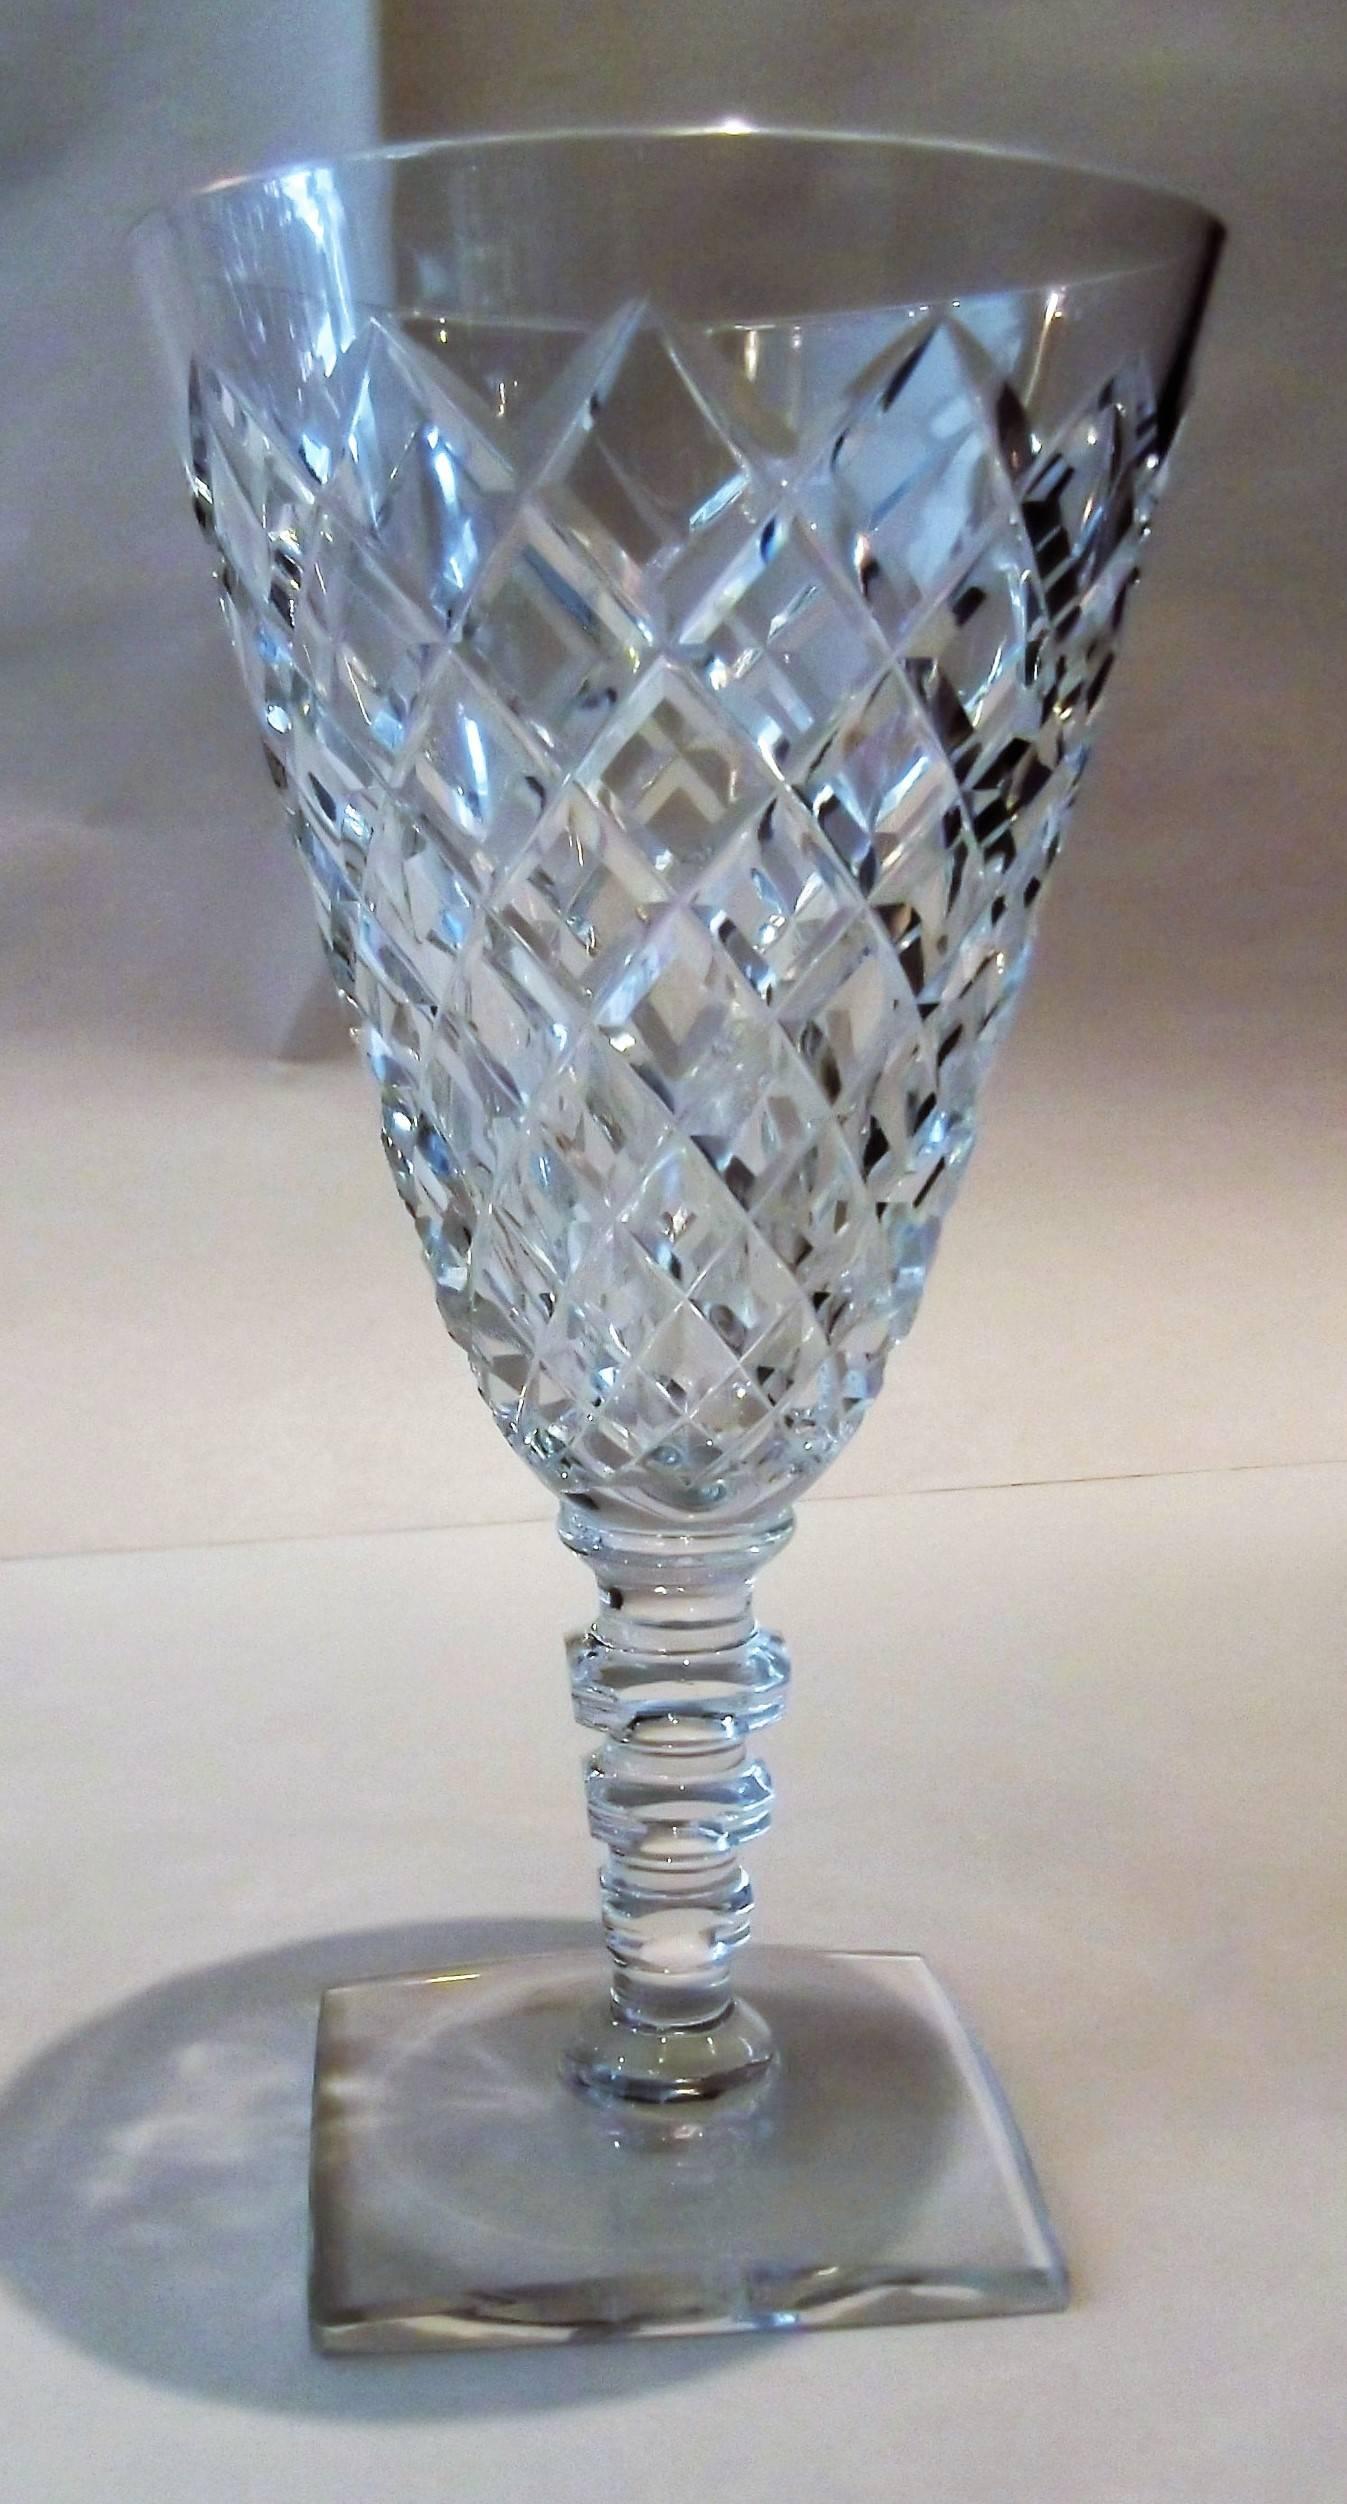 A set of 14 wine stems, hand blown and handcut on a cutting wheel by Hawkes of Corning New York. One of the best American glass makers in the late 19th and early 20th centuries.
Thomas Gibbons Hawkes,
(1846-1913).
Born in Ireland, Hawkes